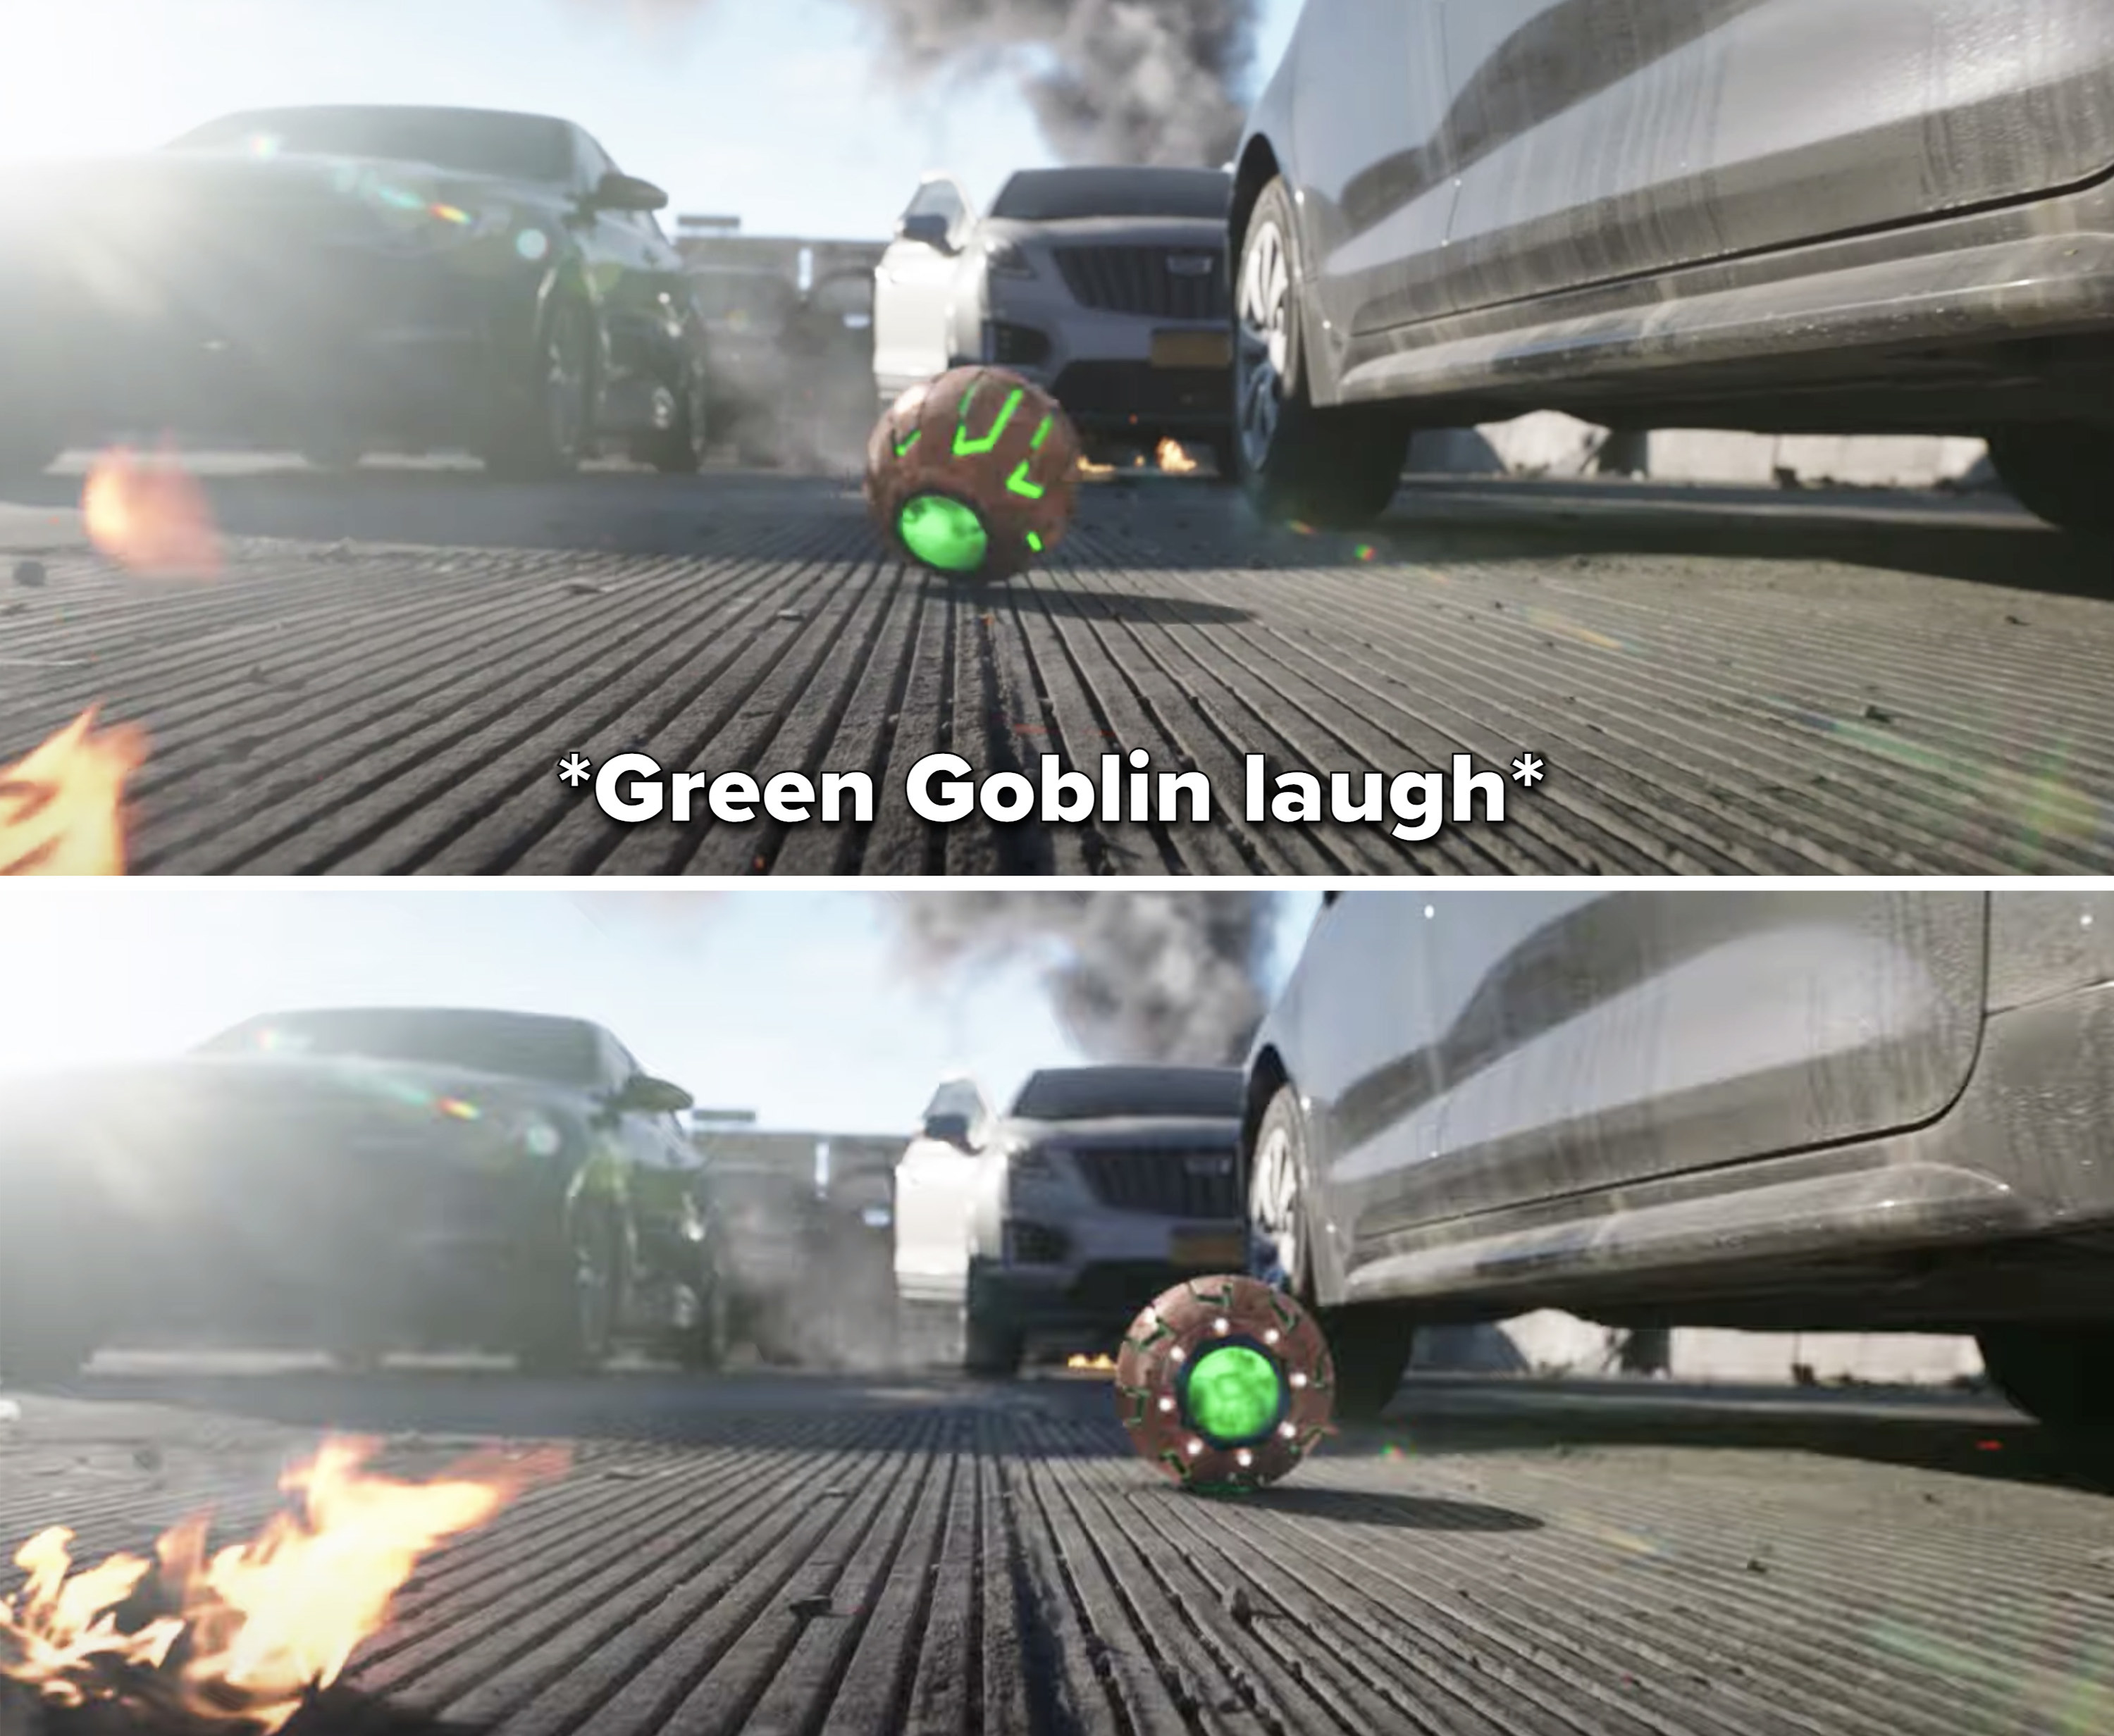 Green Goblin laughing and a green orb rolling into the frame